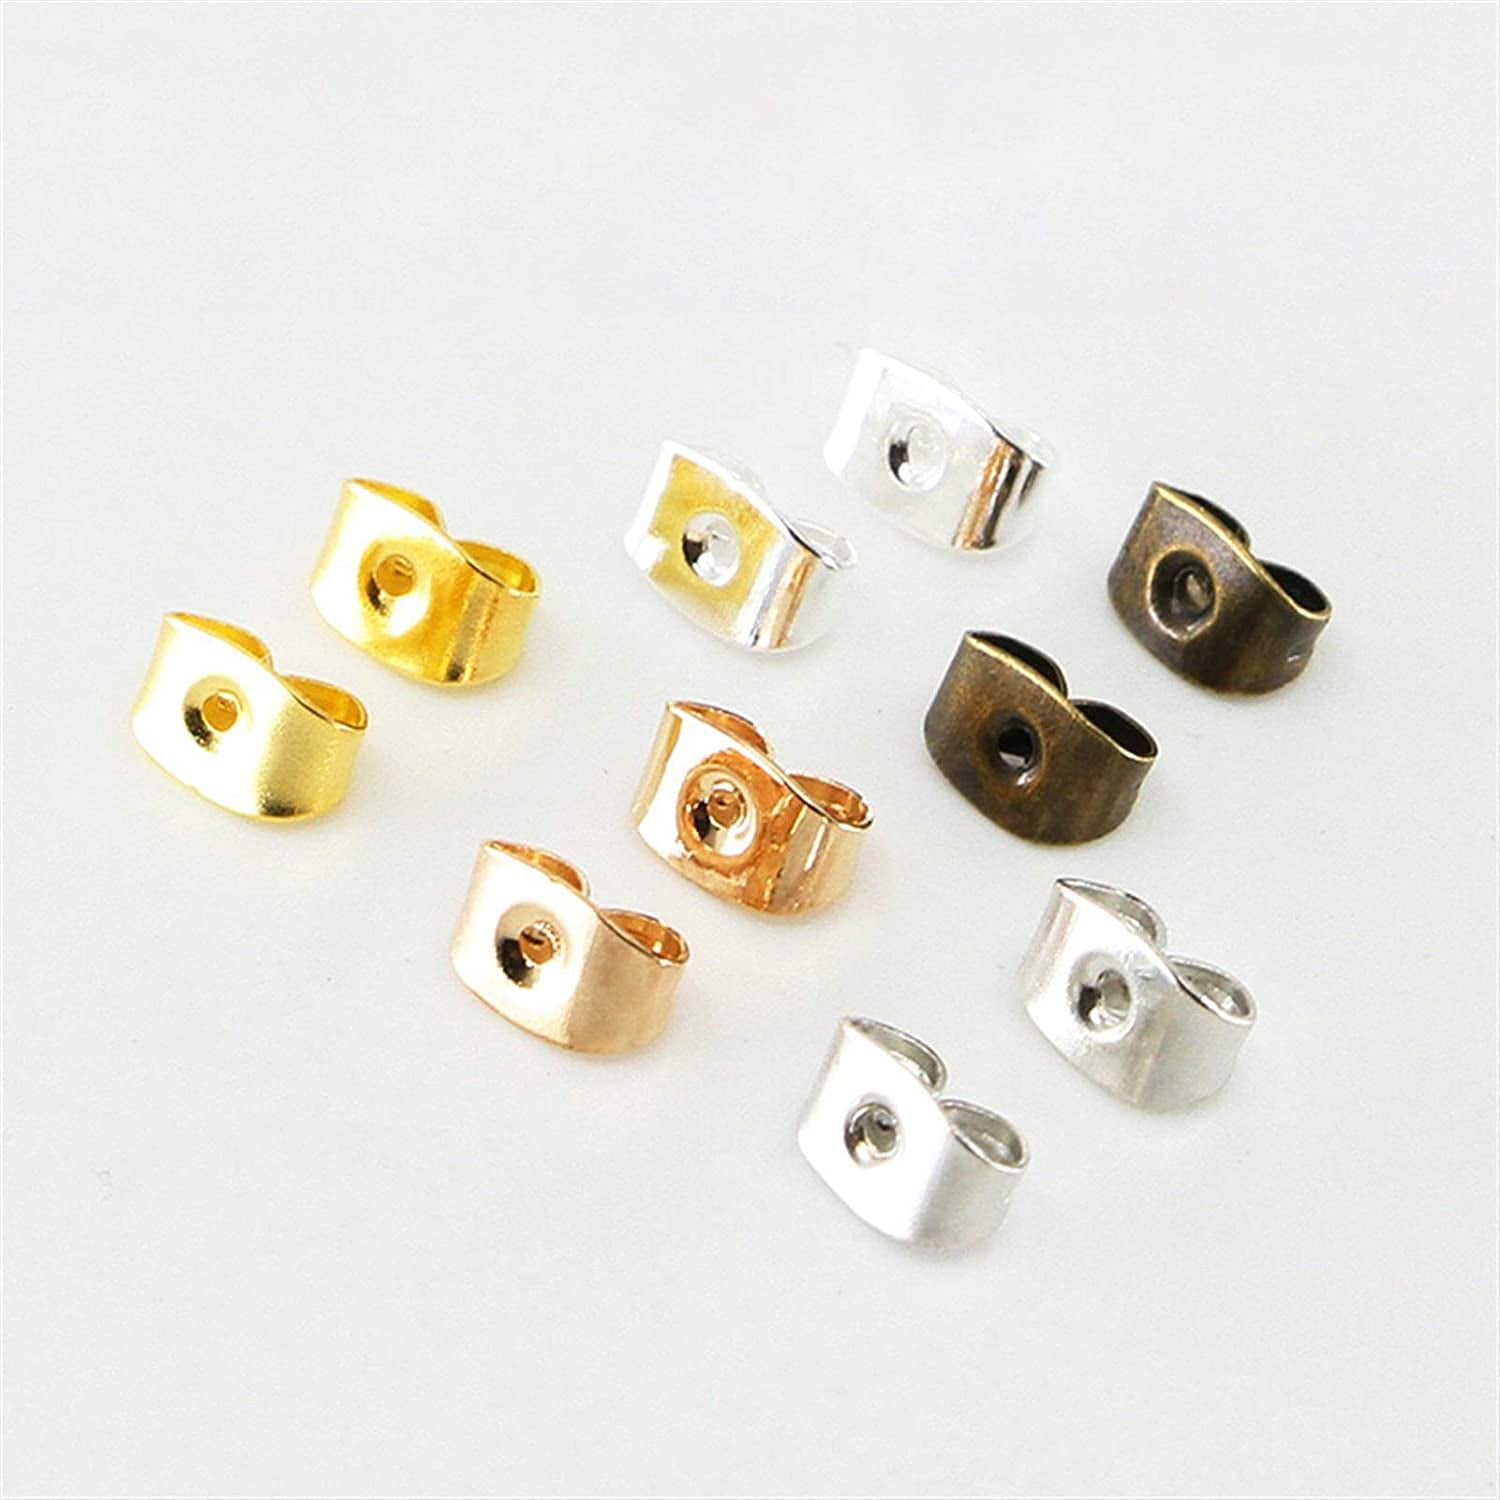 Wholesale Earring Backs, 100pcs Bullet Clutch Earring Backs Replacements  Hypo-Allergenic Rubber Earring stoppers From m.alibaba.com